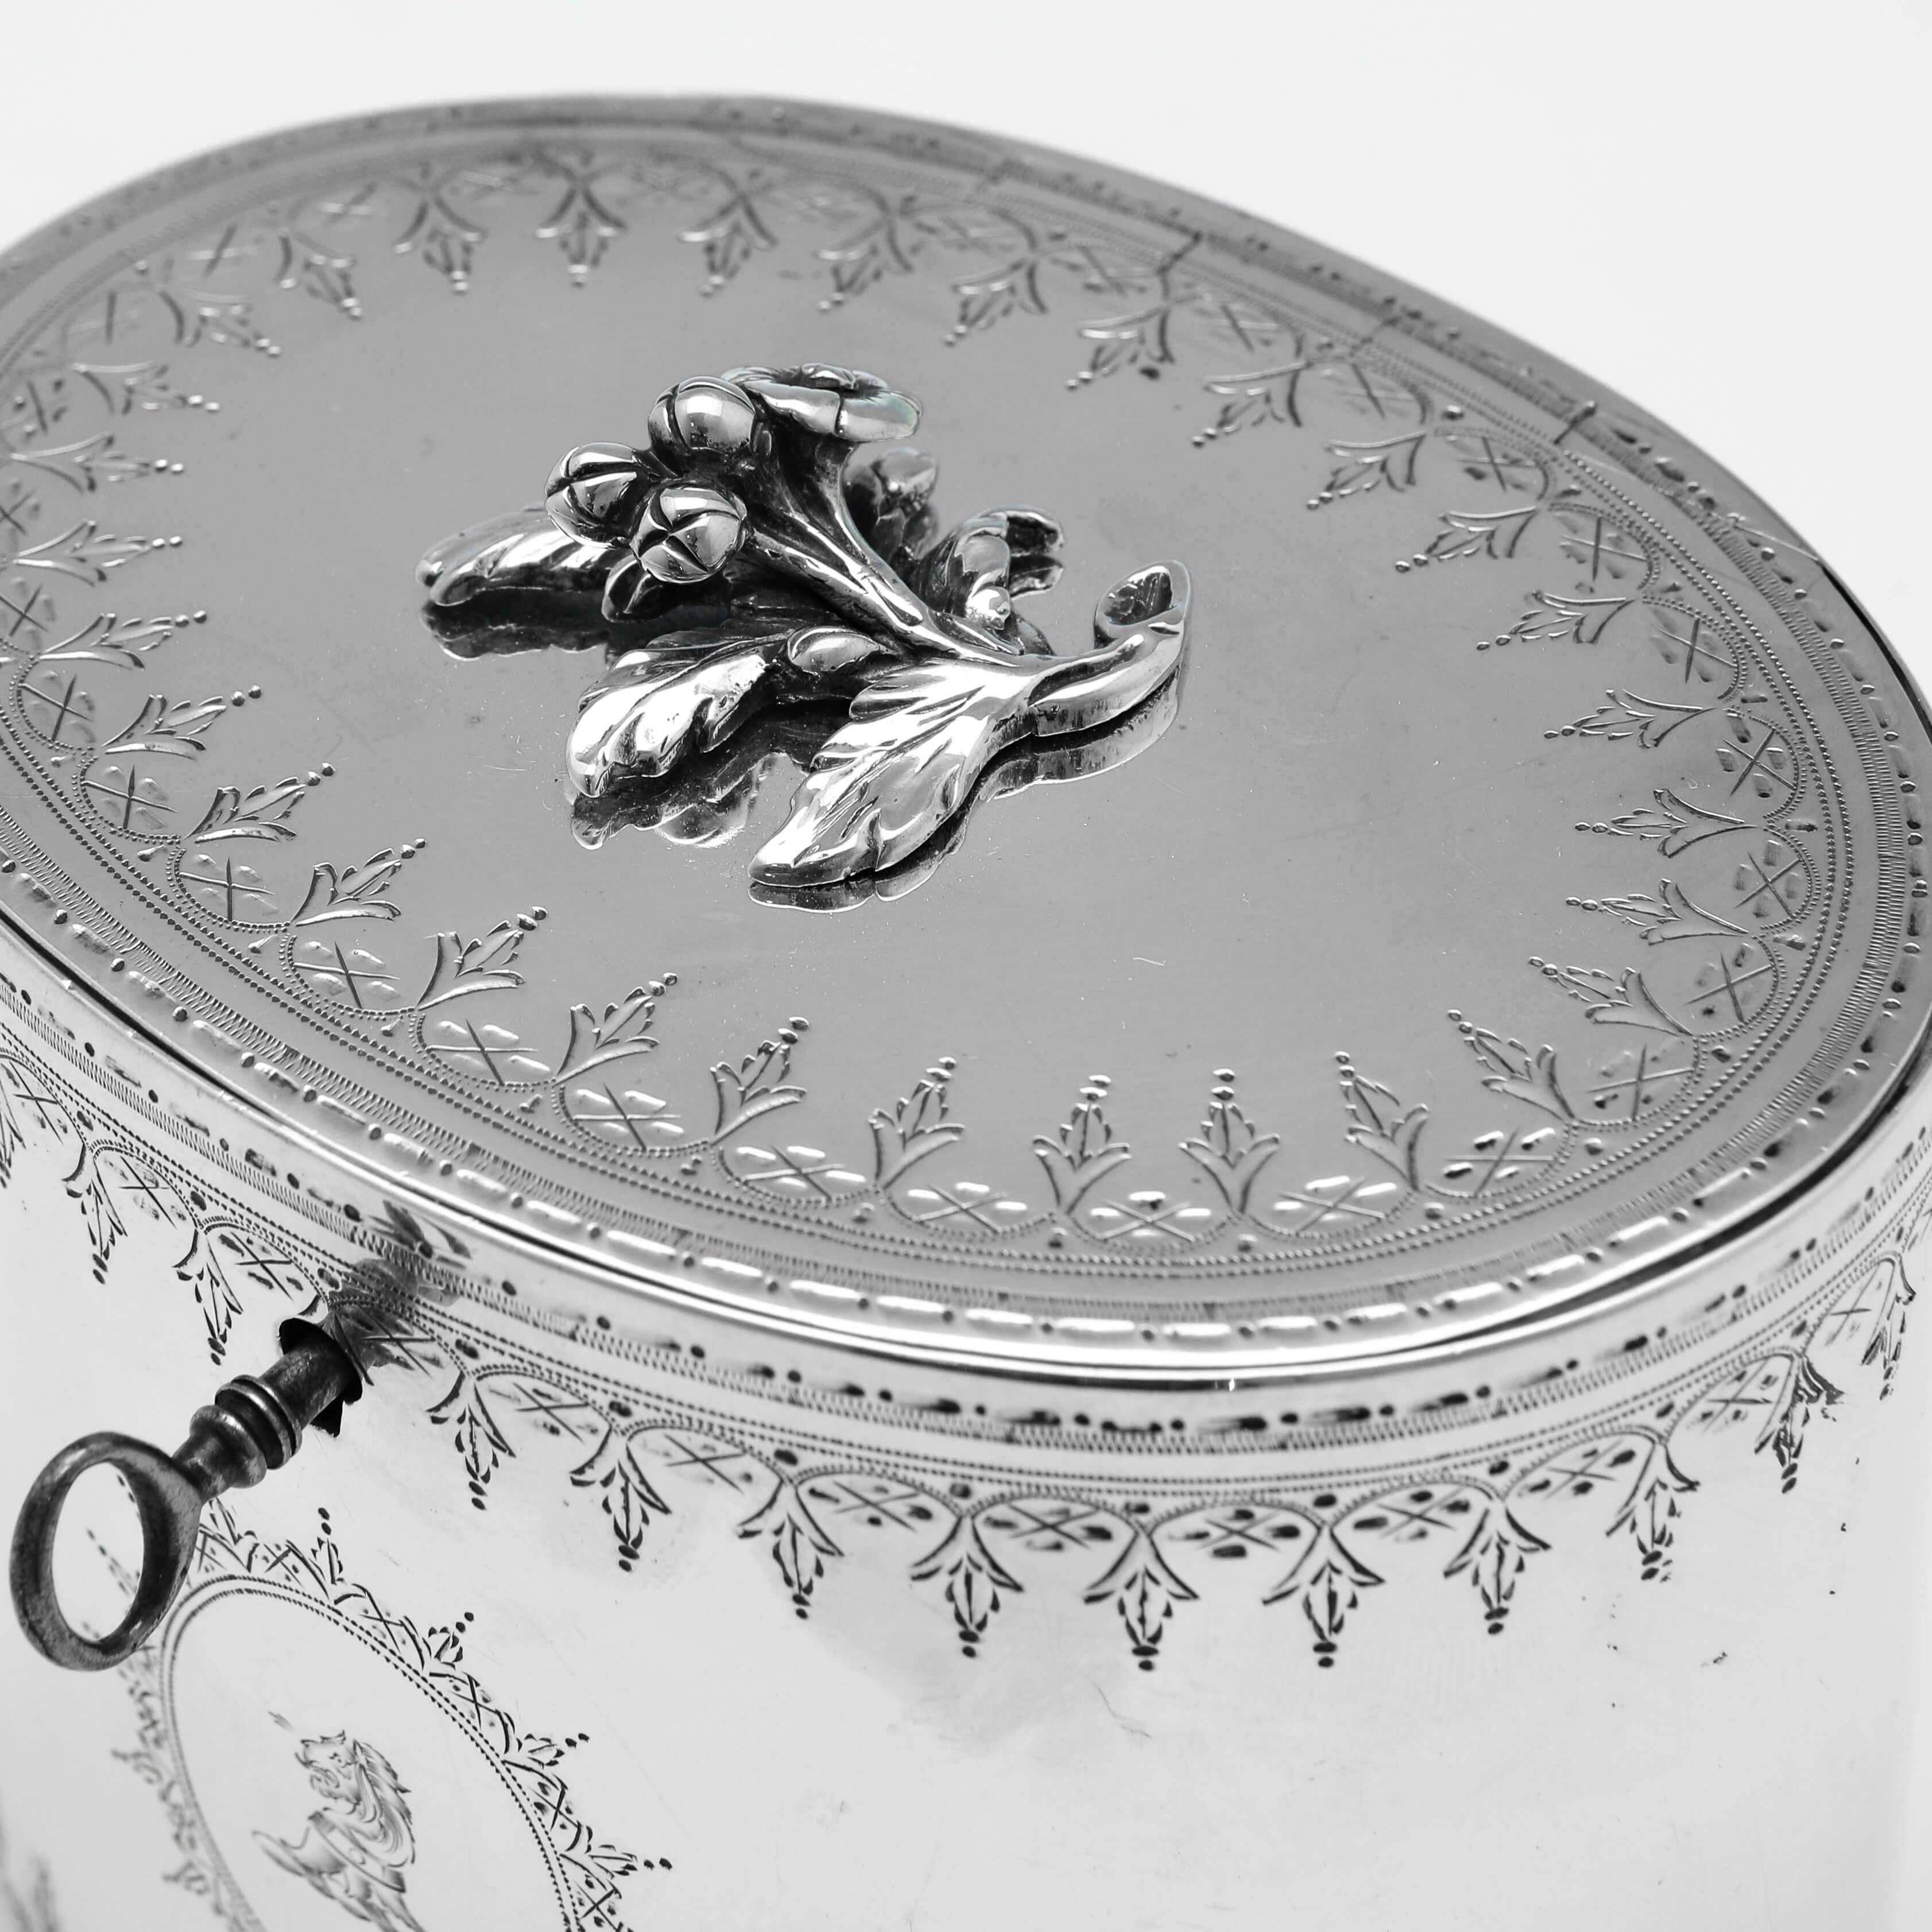 Stunning Engraved Neoclassical Antique Sterling Silver Tea Caddy - London 1806 For Sale 1